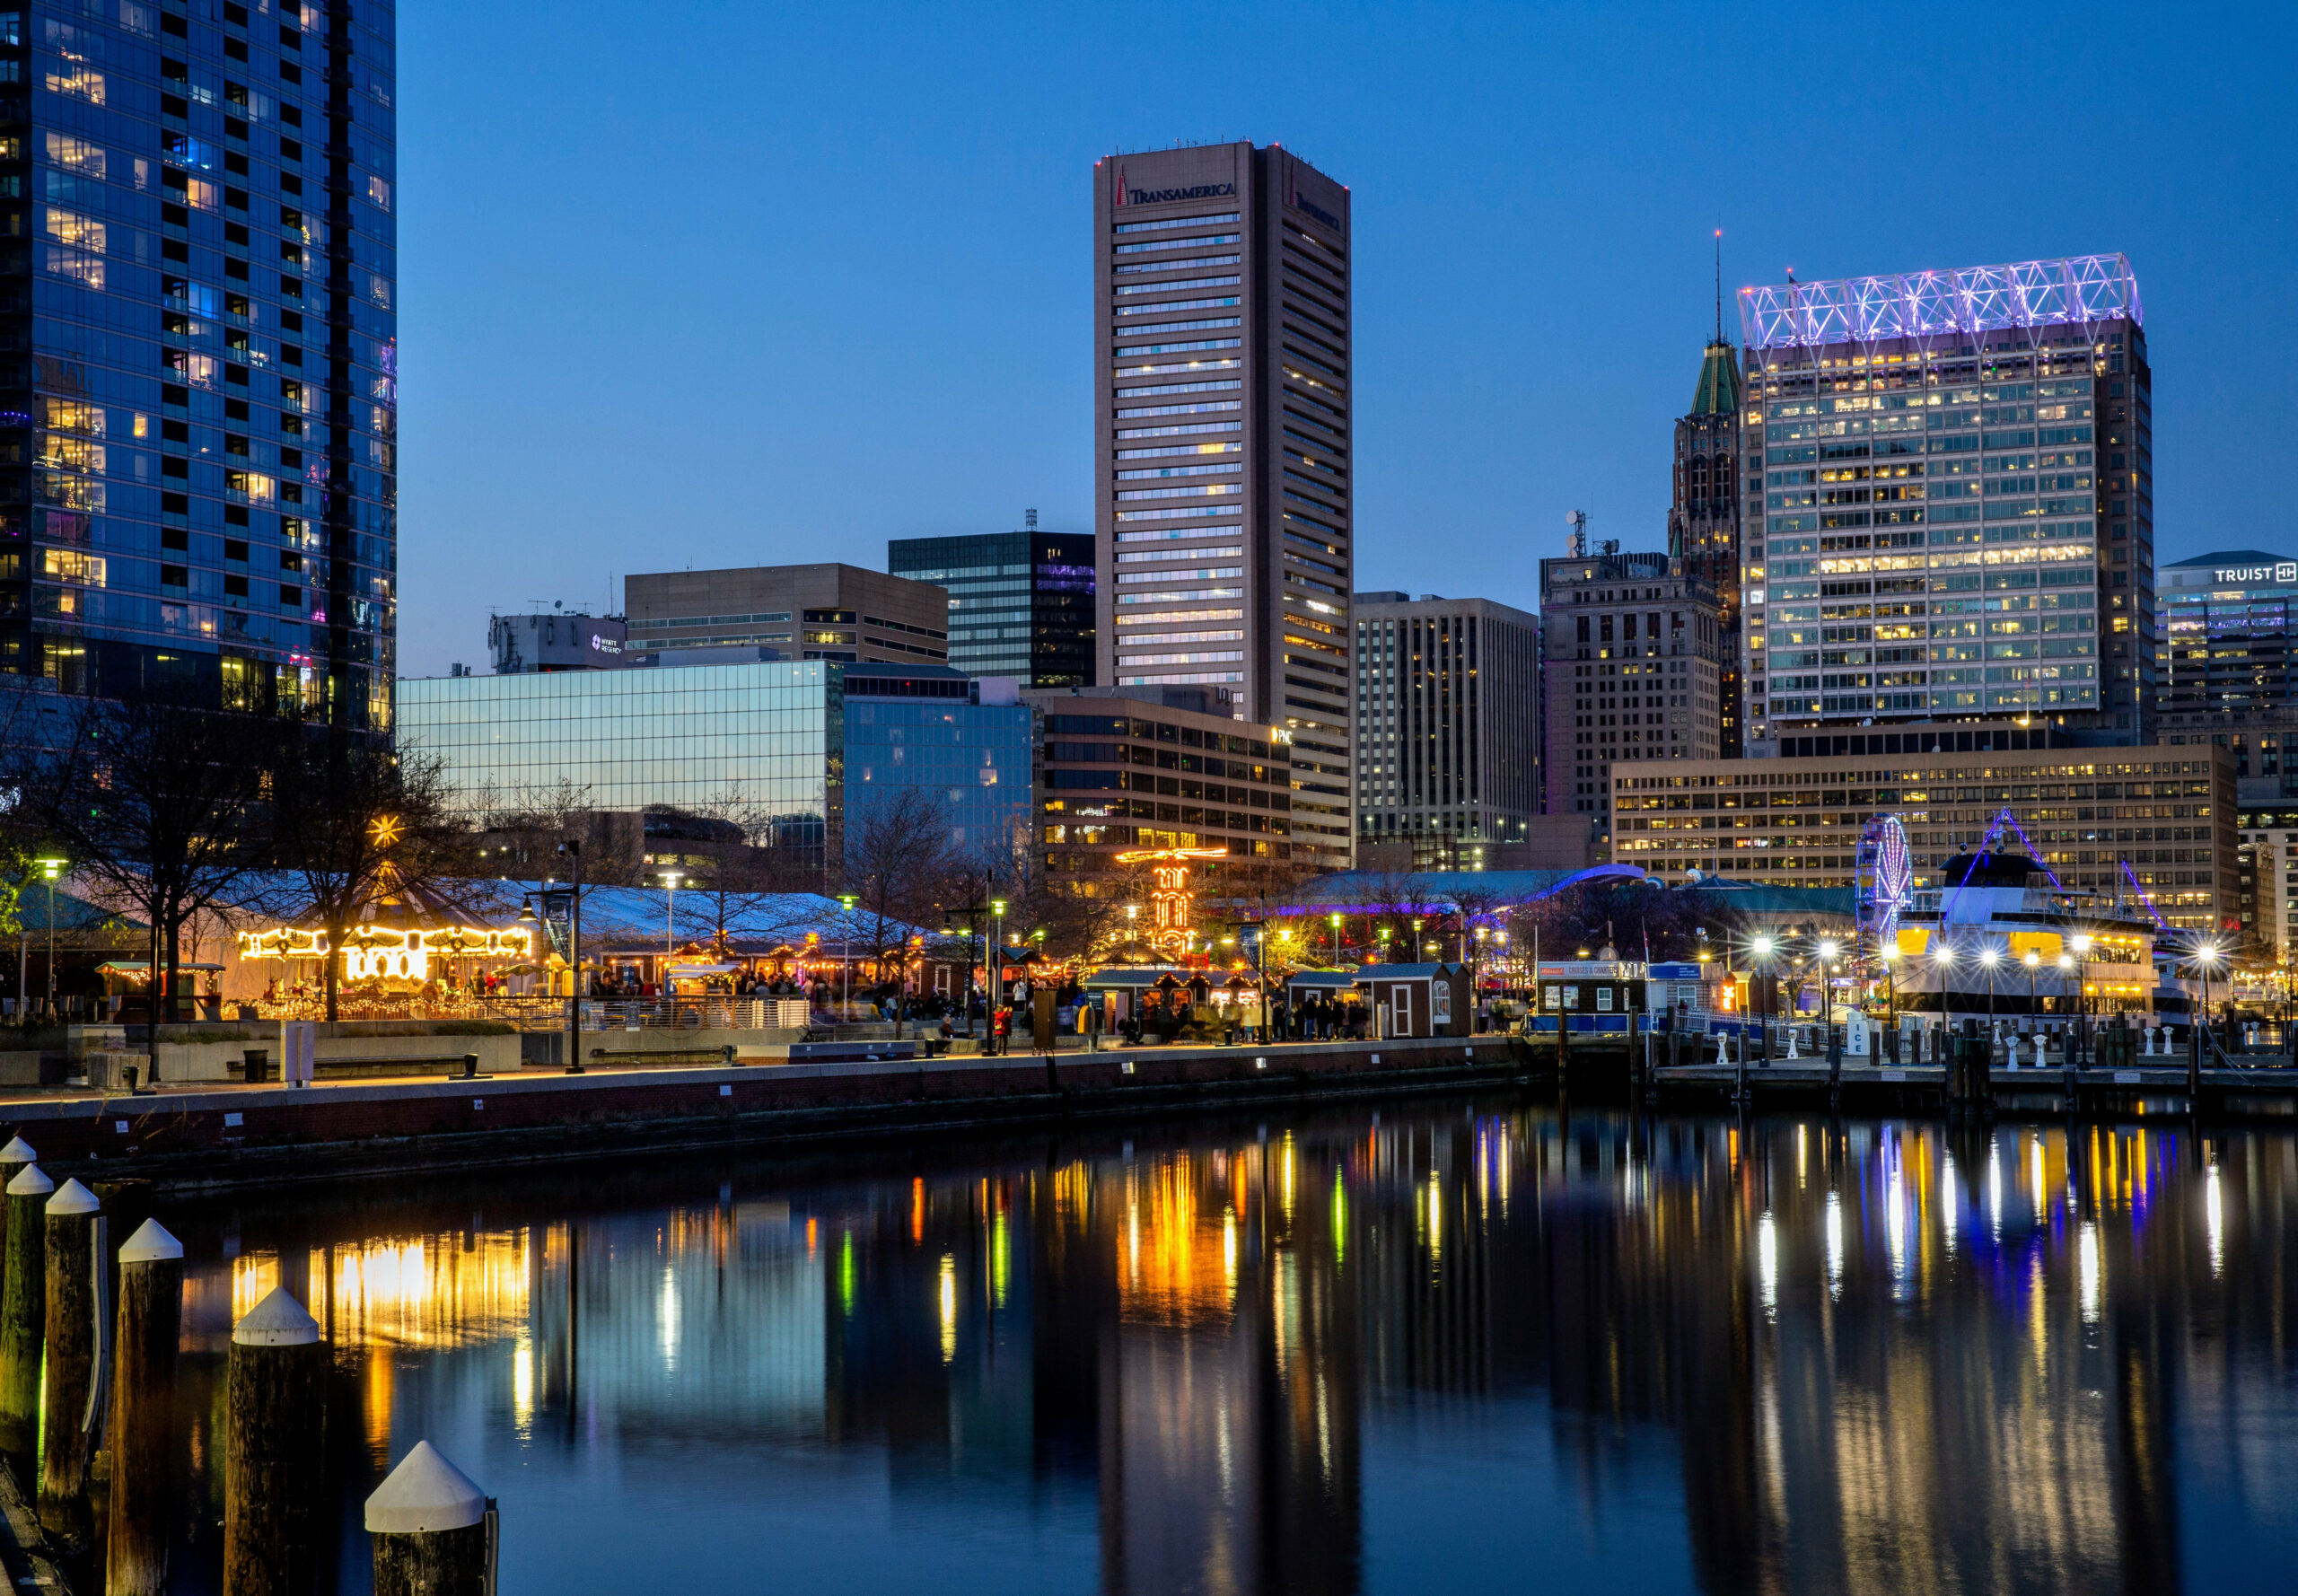 Baltimore's Inner Harbor offers a mesmerizing holiday voyage on a large body of water.